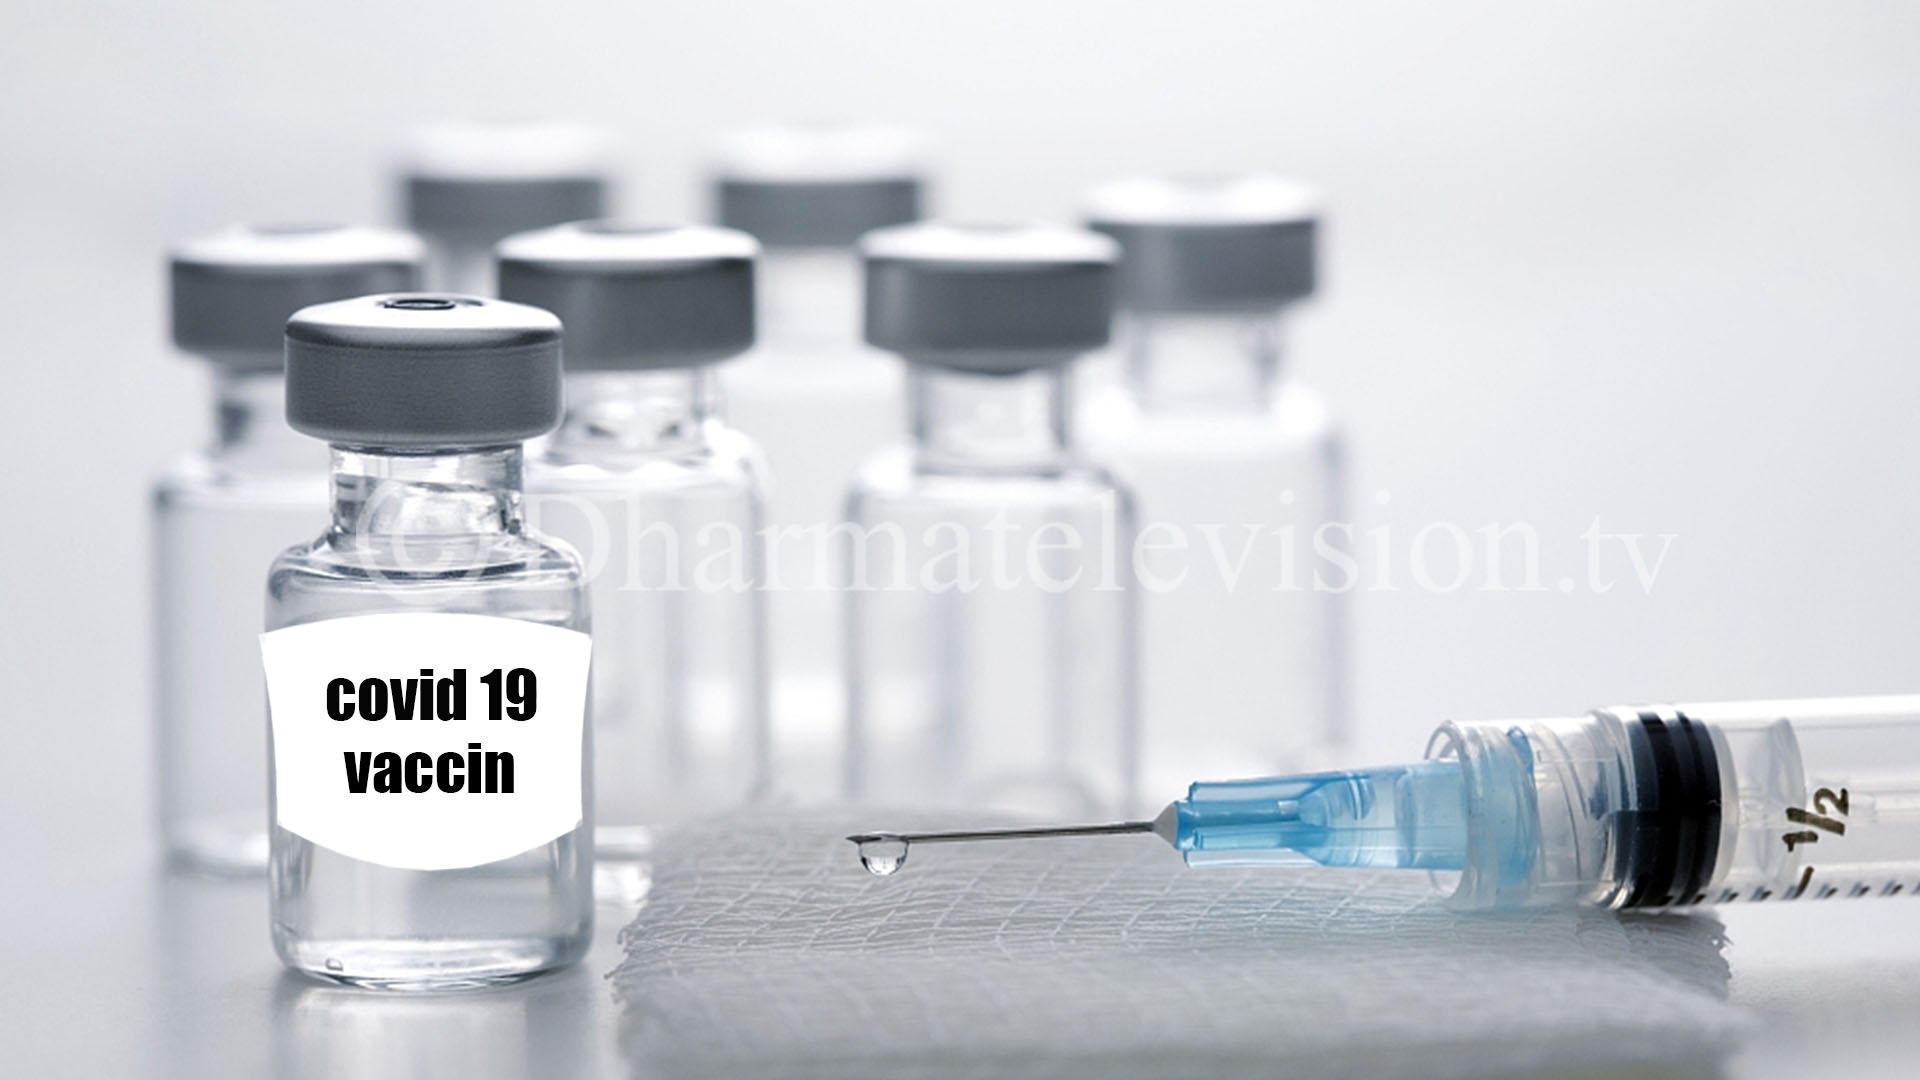 Citizens of the United States will receive corona vaccine by July next year